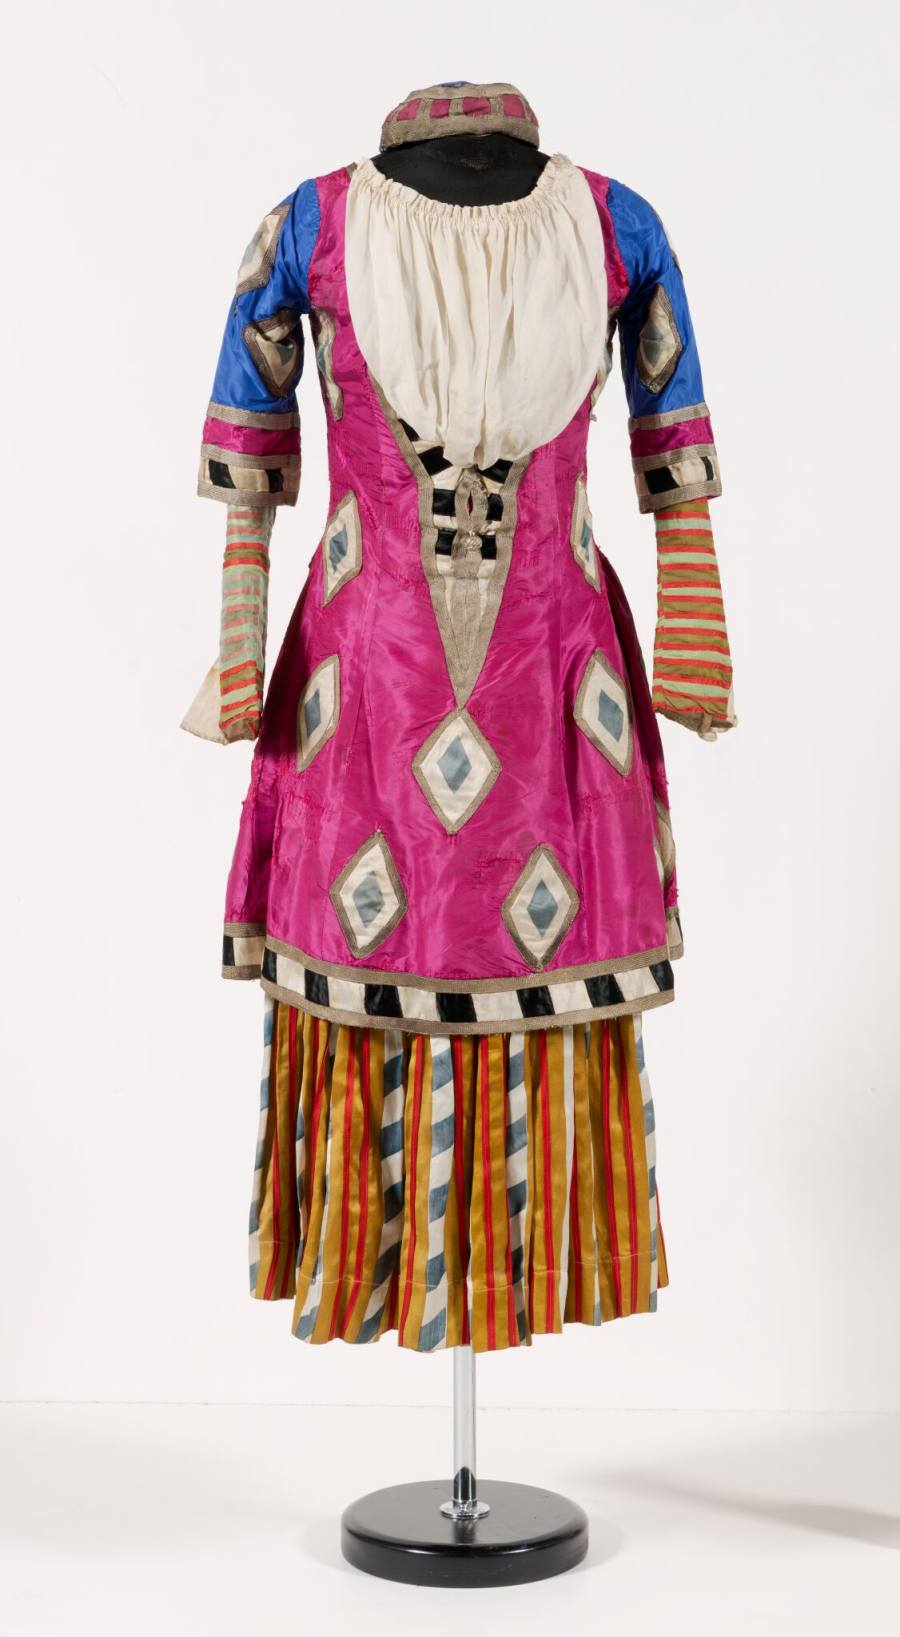 8. L.Bakst (1866 – 1924), design for the costume of the Tsarina’s girlfriend in “Thamar”, chor.: M.Fokine, 1912; satin, cotton fabric, silk ribbon, satin ribbon, lace, metal buttons, metal hooks with loops, weaving, sewing, applique, painting; private Collection of O. and I.Mazur, London © Tretyakov Gallery 